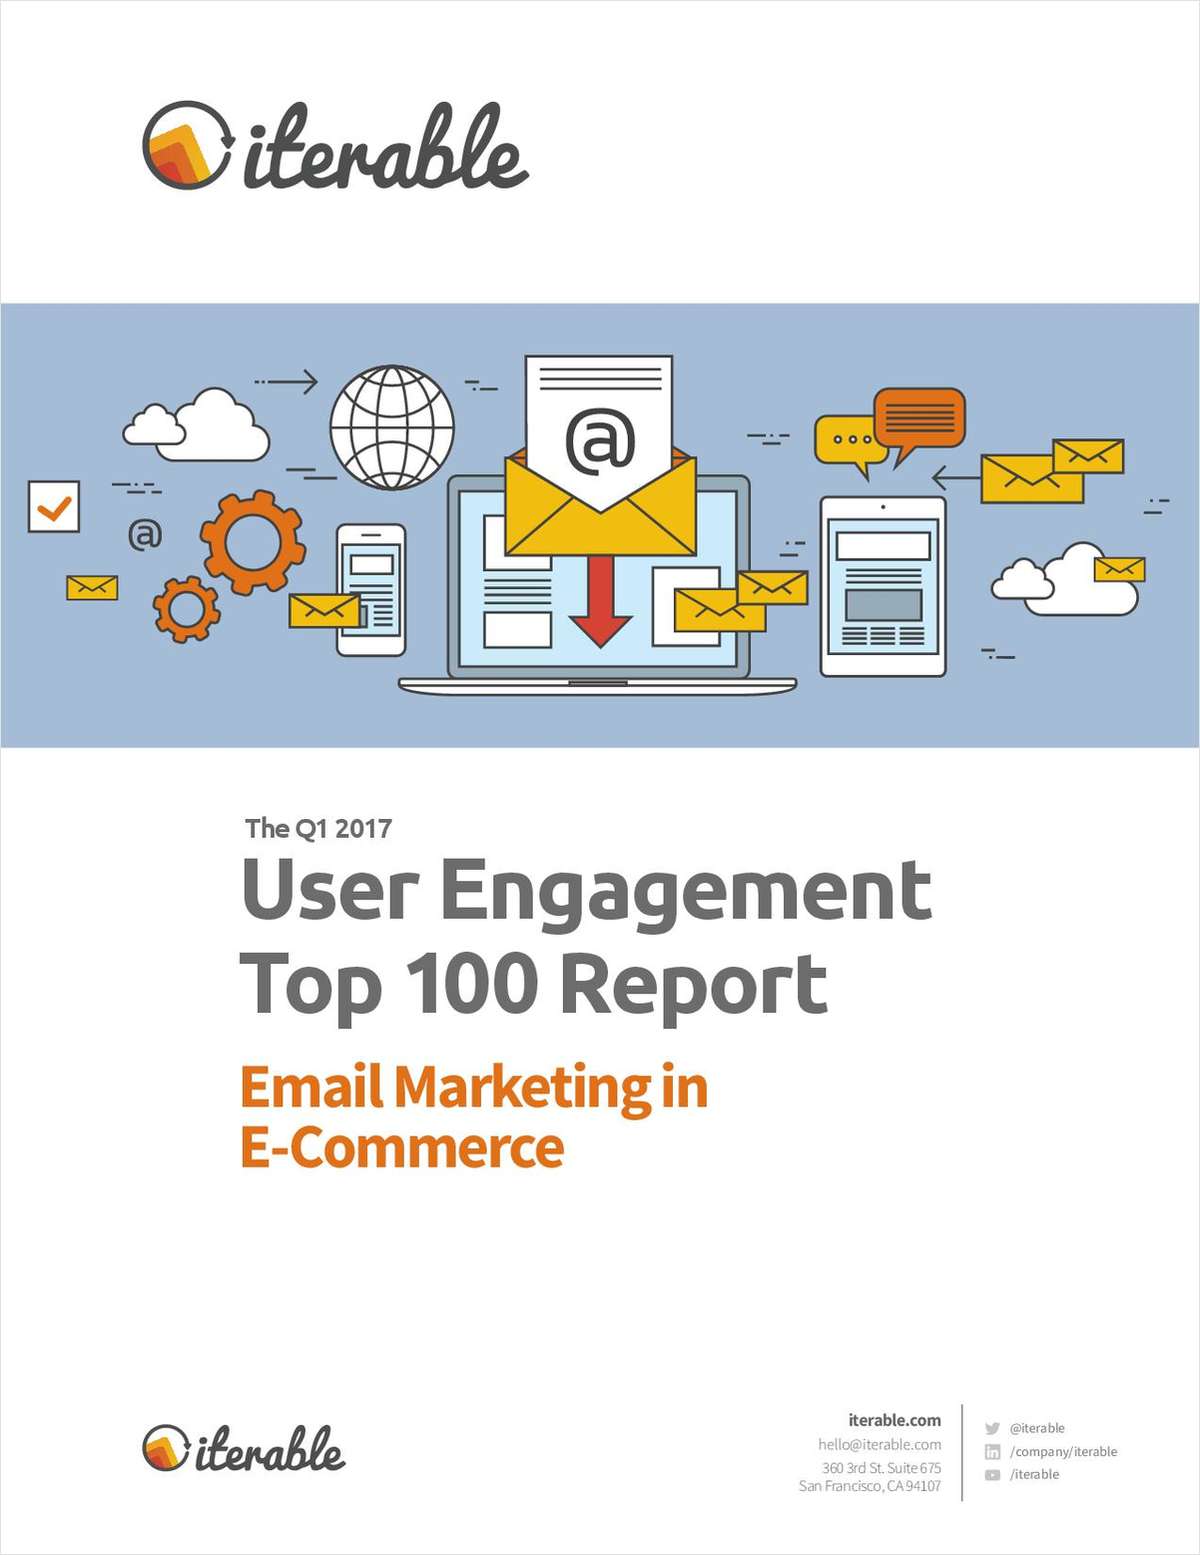 The User Engagement Top 100 Report: Email Marketing in E-Commerce